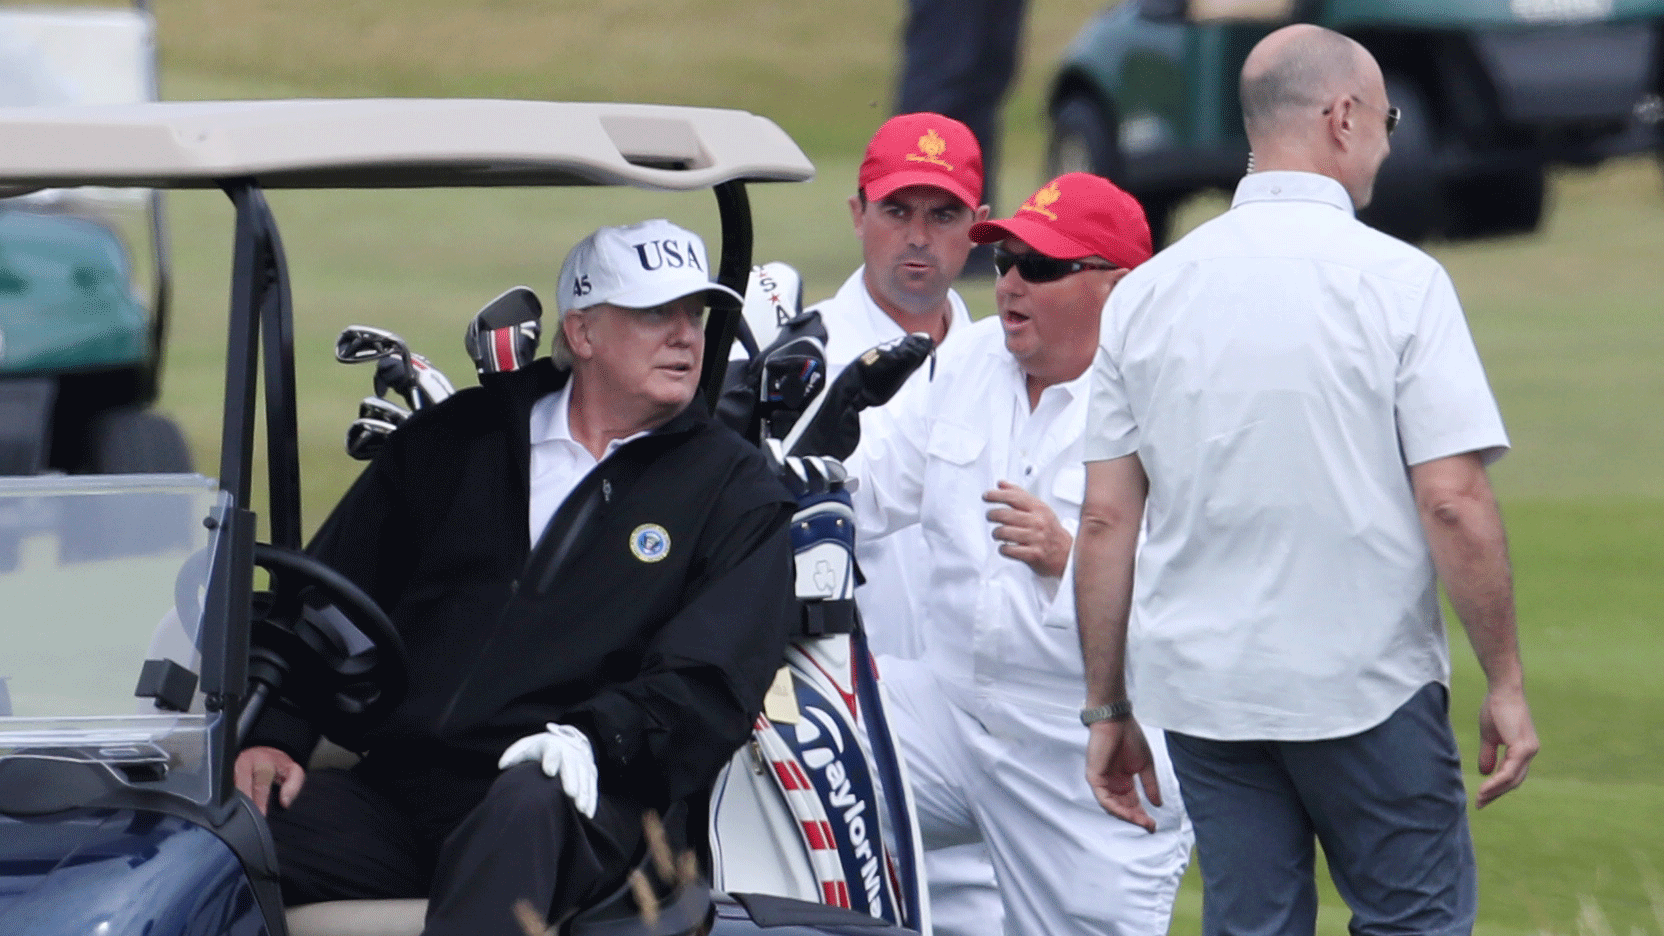 Golf under pressure to distance itself from US President Donald Trump